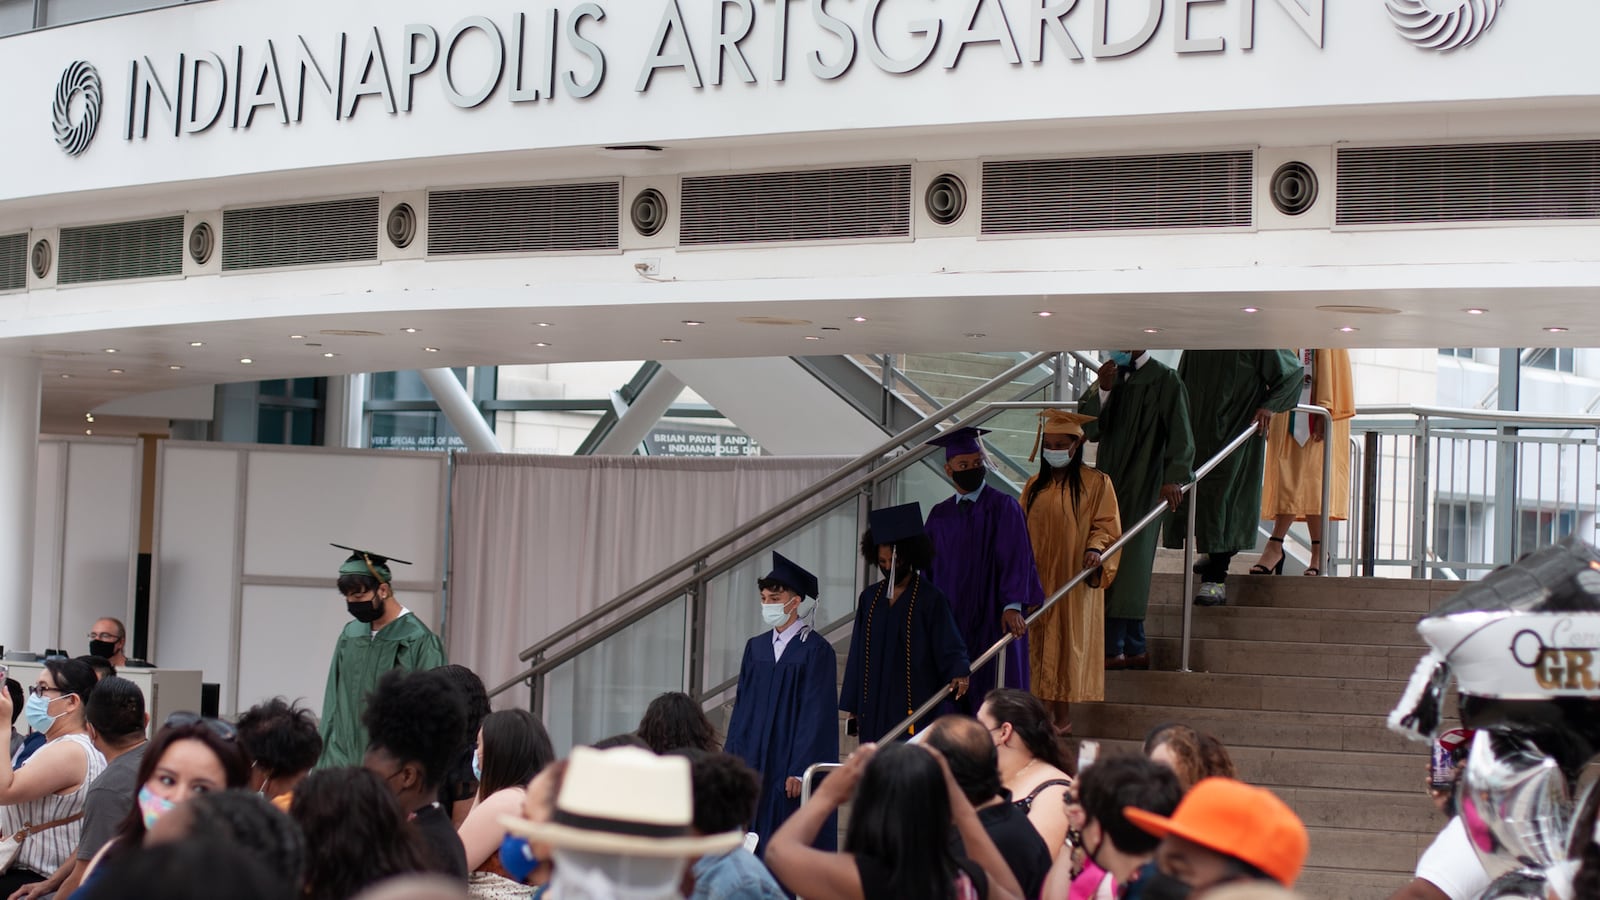 Graduating students, wearing traditional garb, walk down a set of stairs underneath a large structure that reads “Indianapolis Artsgarden” as family look on.